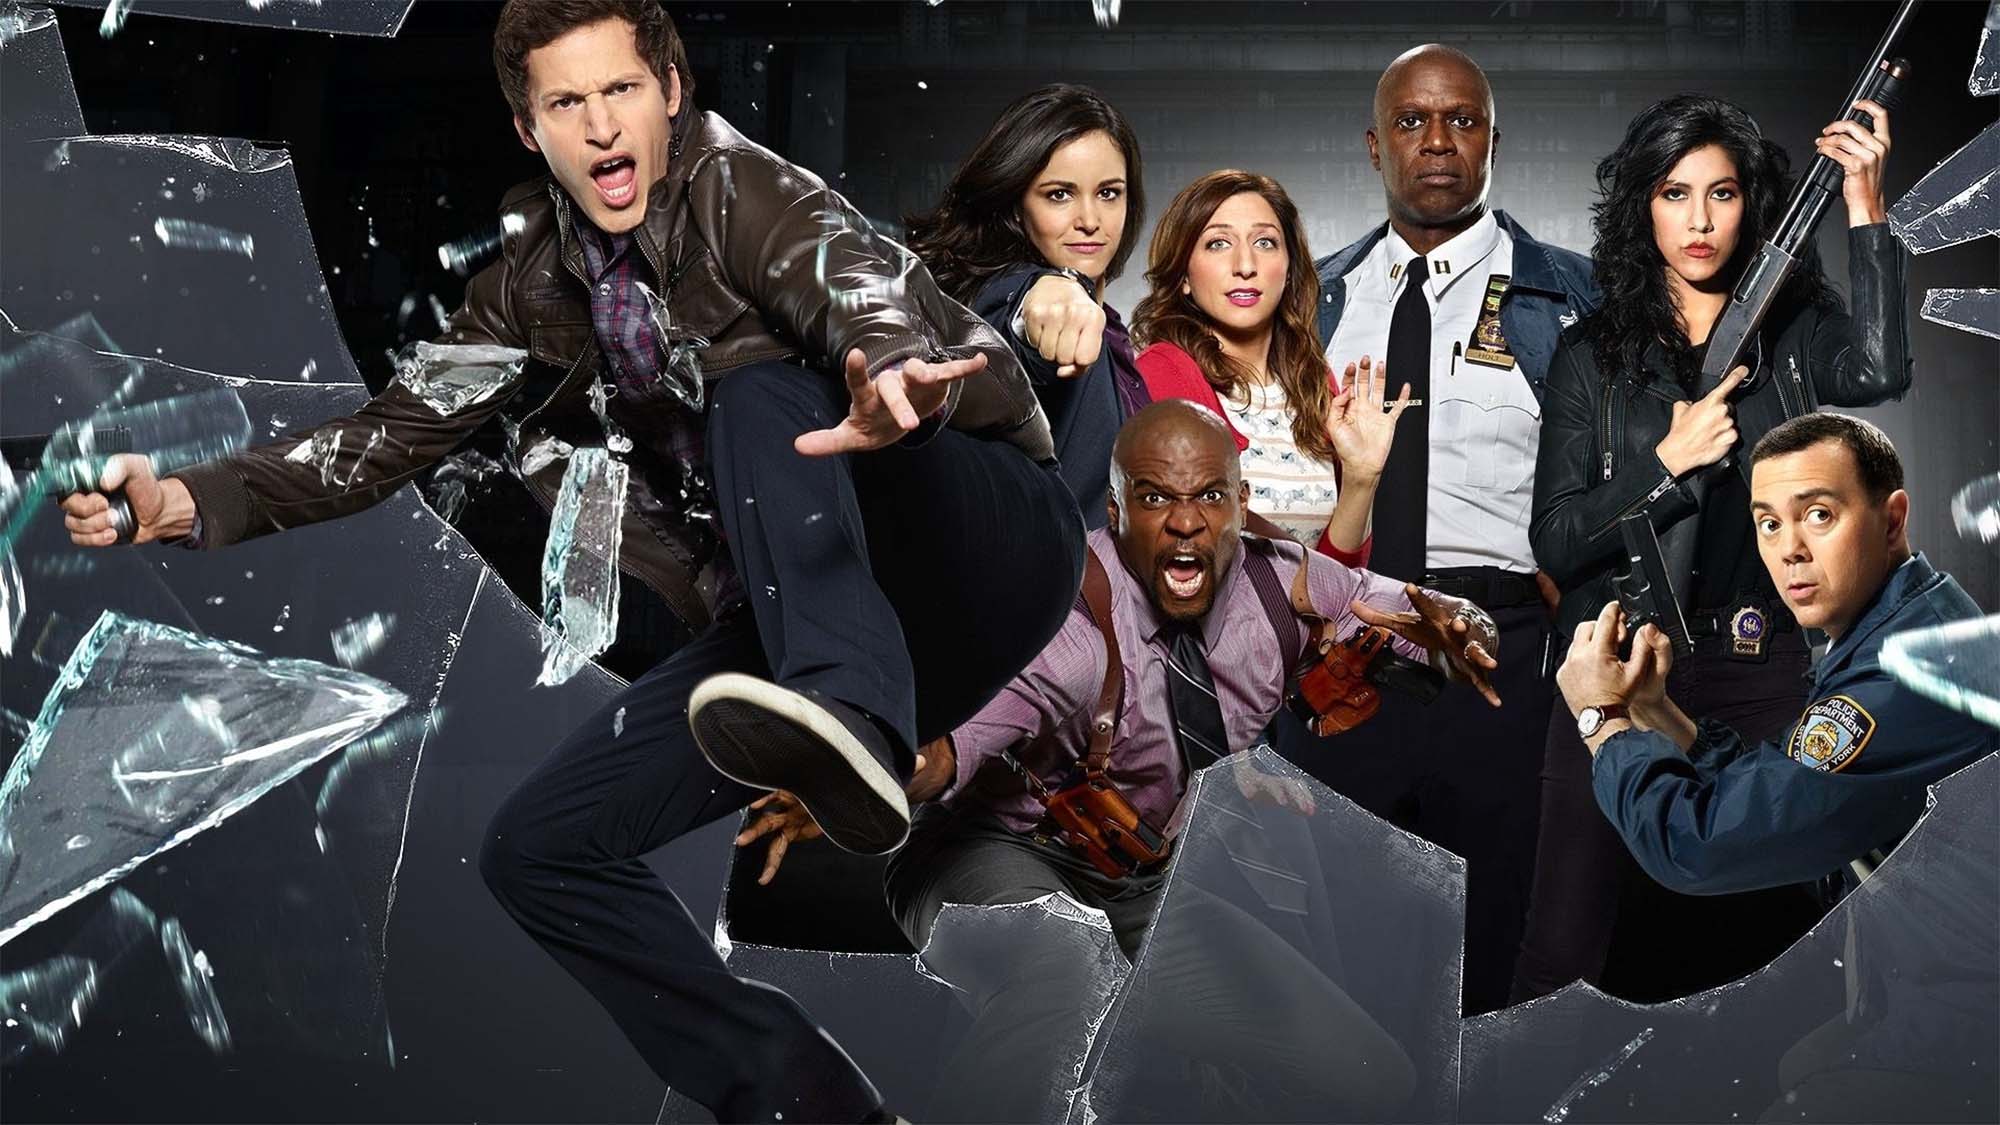 It’s a sad day for TV, folks – Fox’s hit comedy 'Brooklyn Nine-Nine' has been cancelled after a five season run. This is just one of the casualties we were hoping not to see from the 2017-18 round, as broadcast networks plan their schedules for the next TV season.